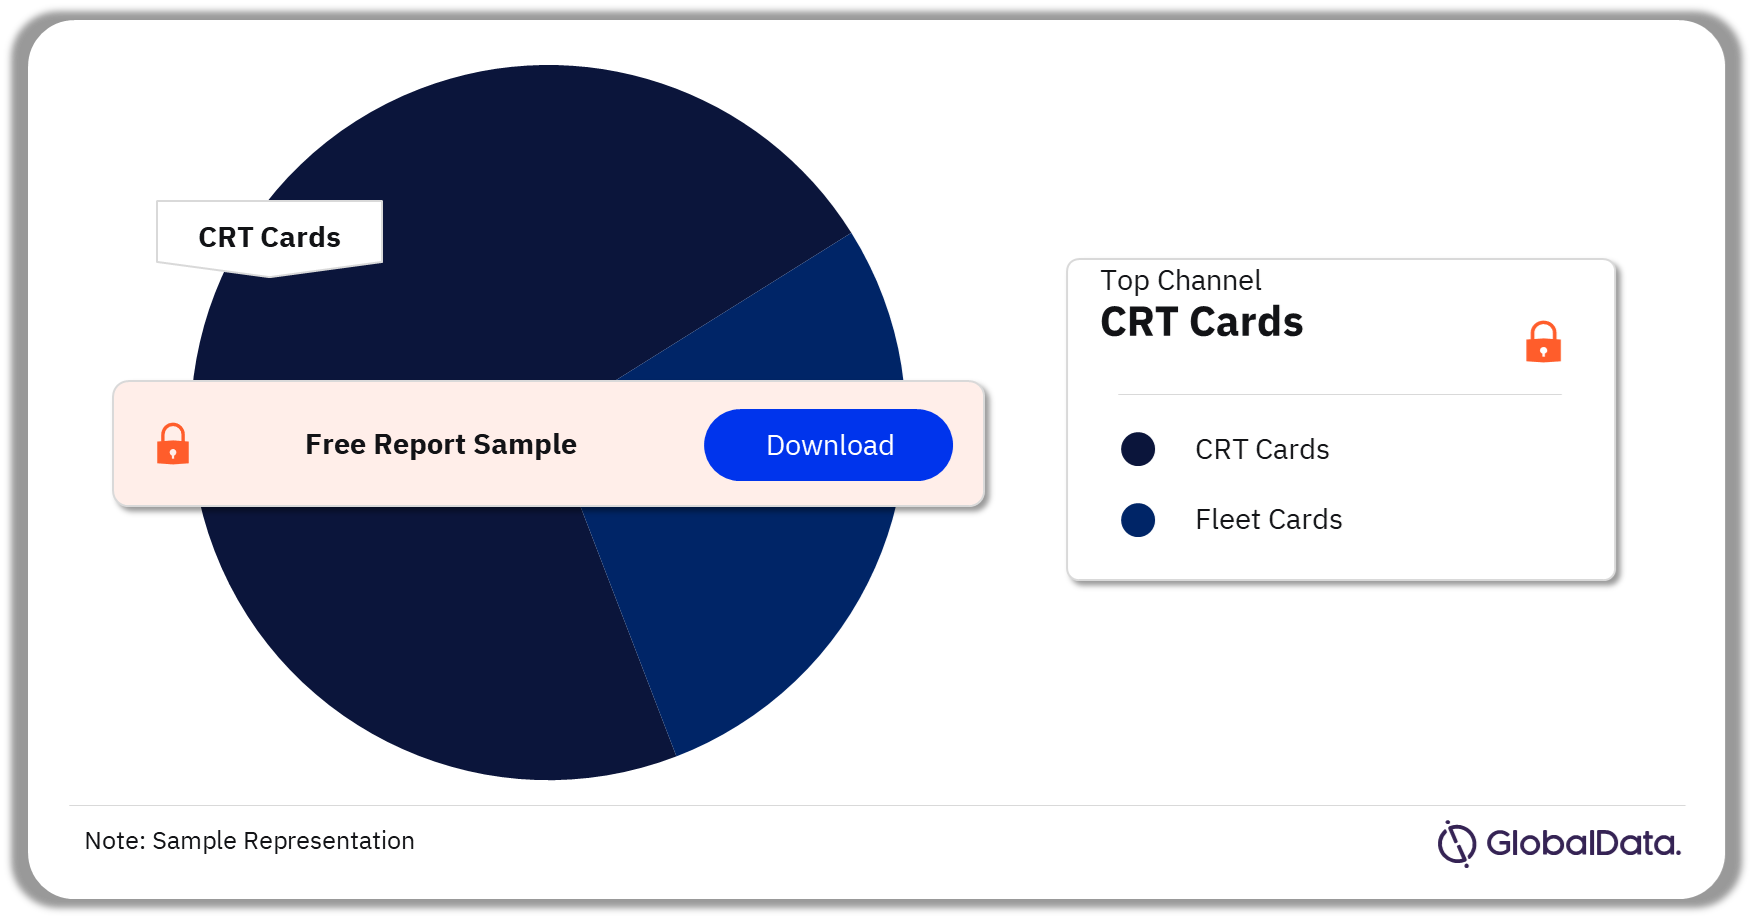 Finland Fuel Cards Market Analysis by Channels, 2022 (%)